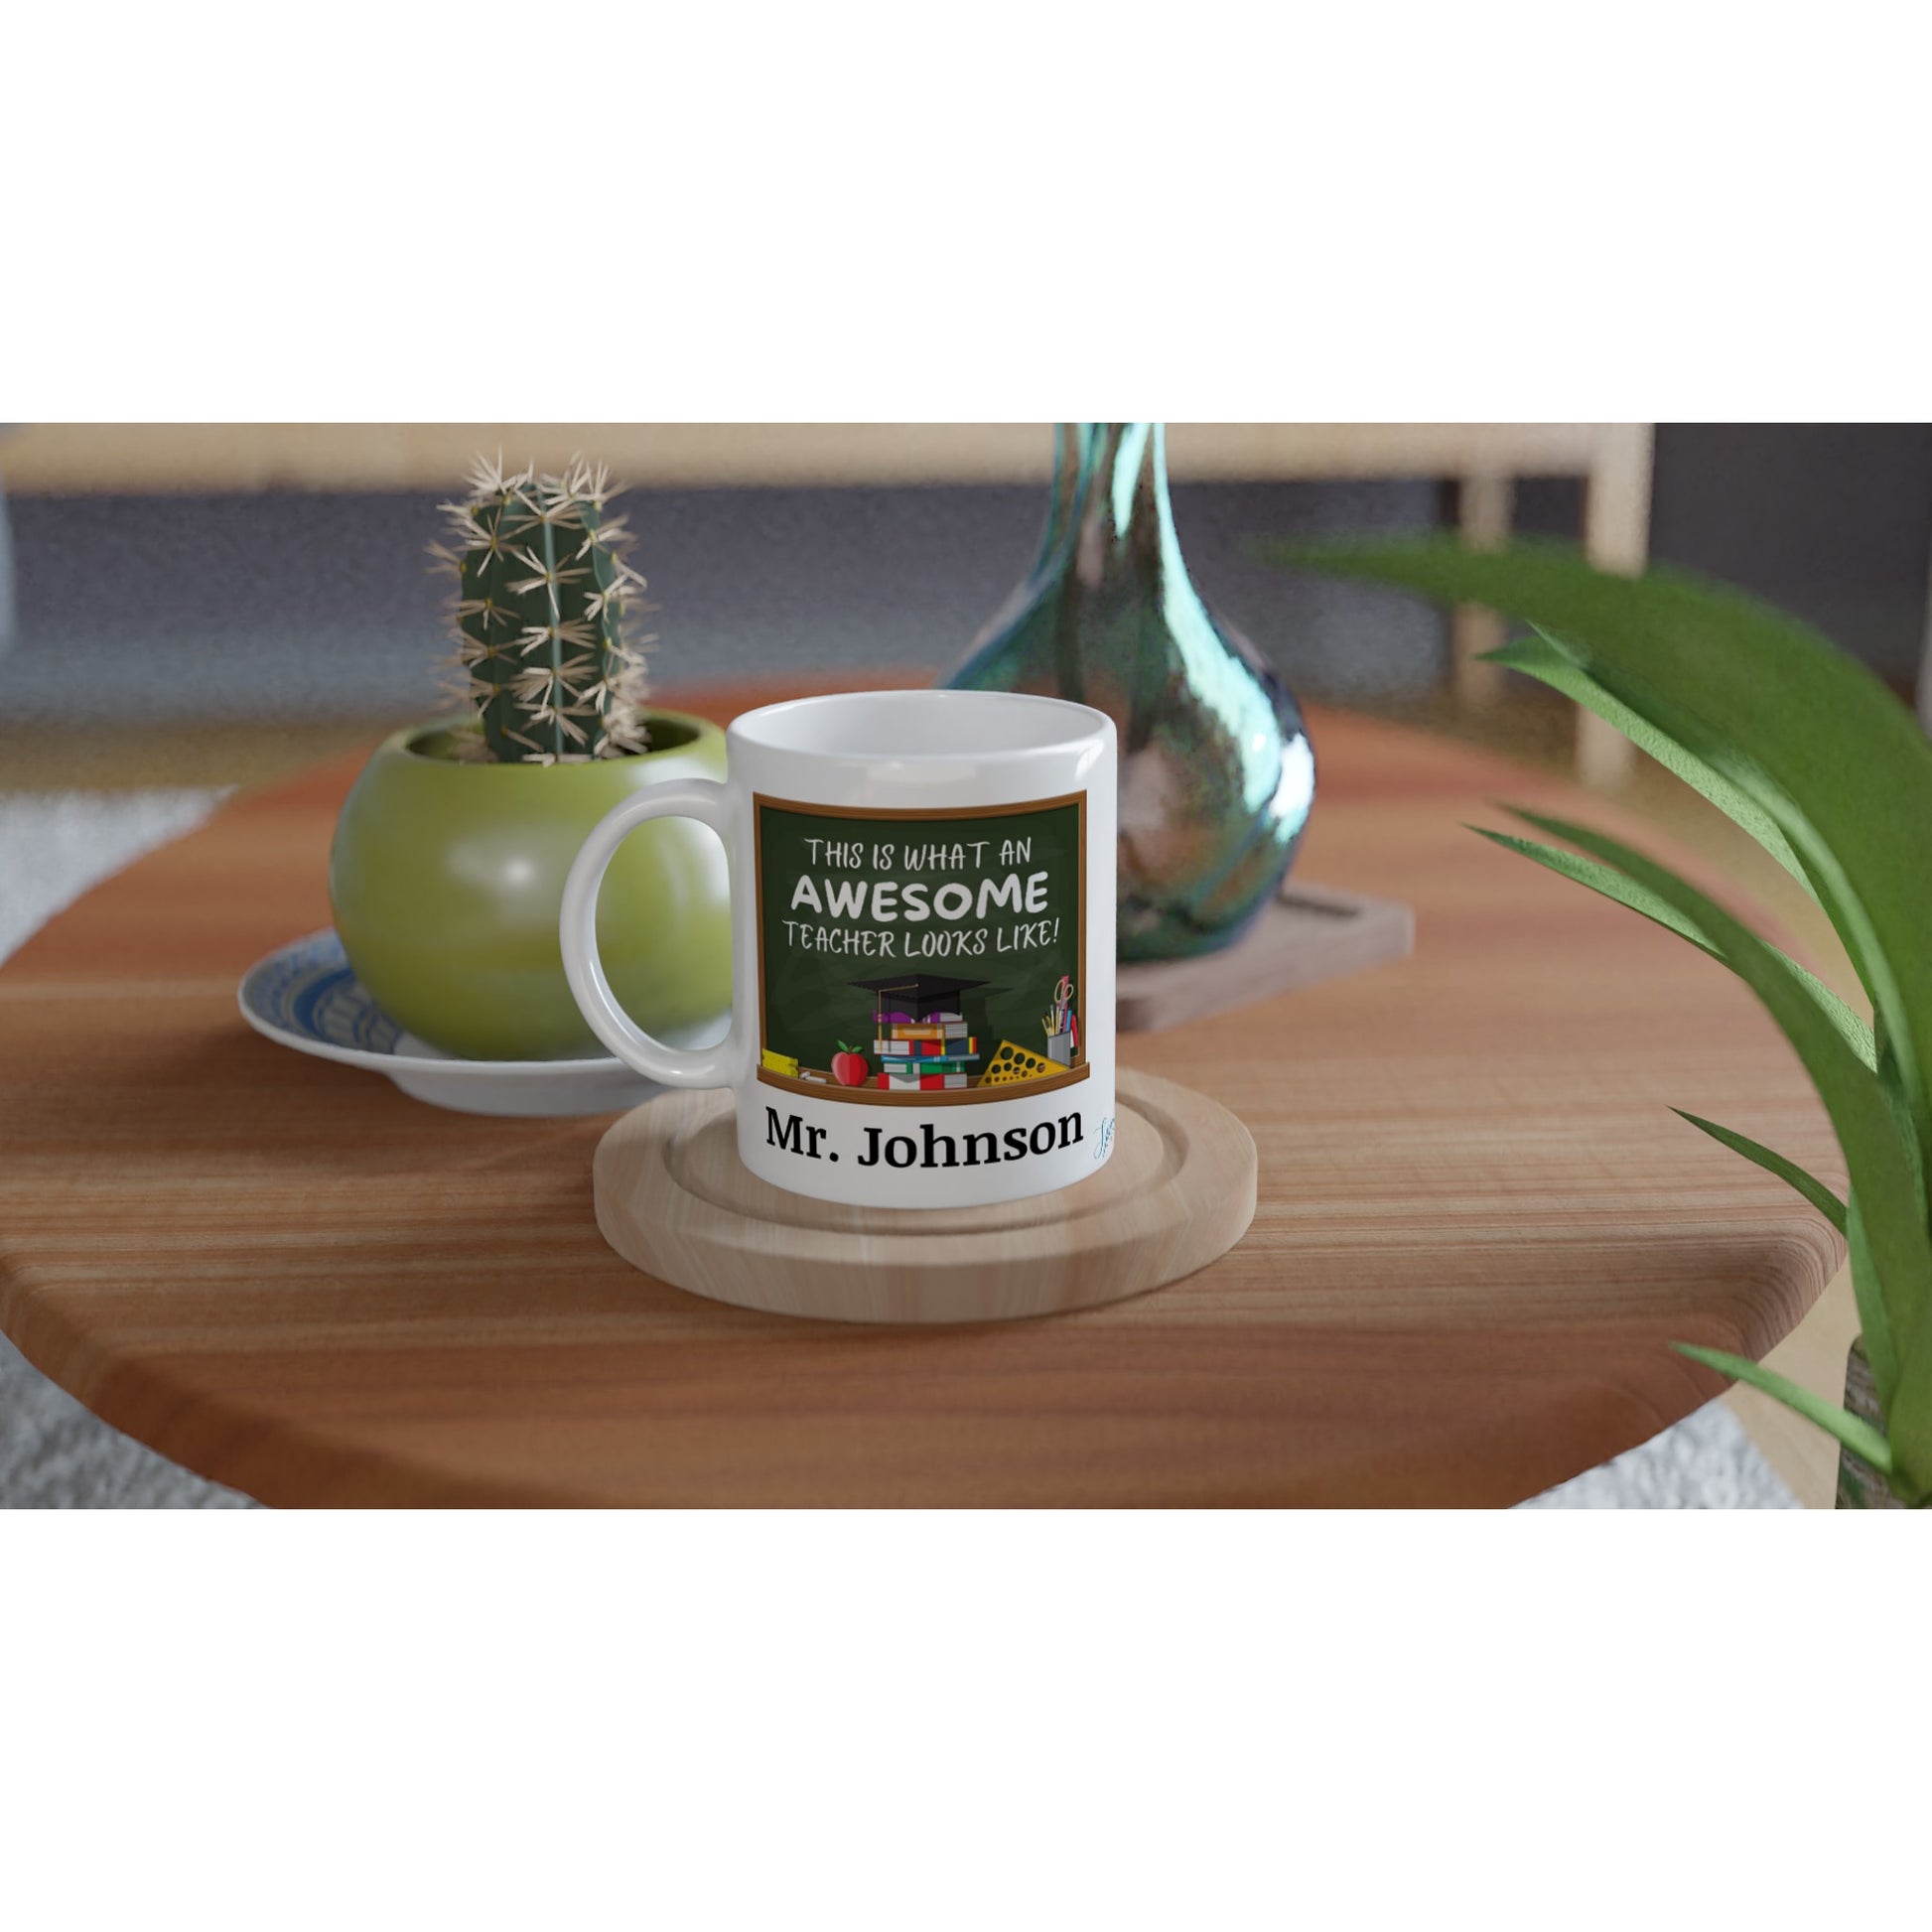 "This is what an awesome teacher looks like!" Customizable Name Mug front view on table